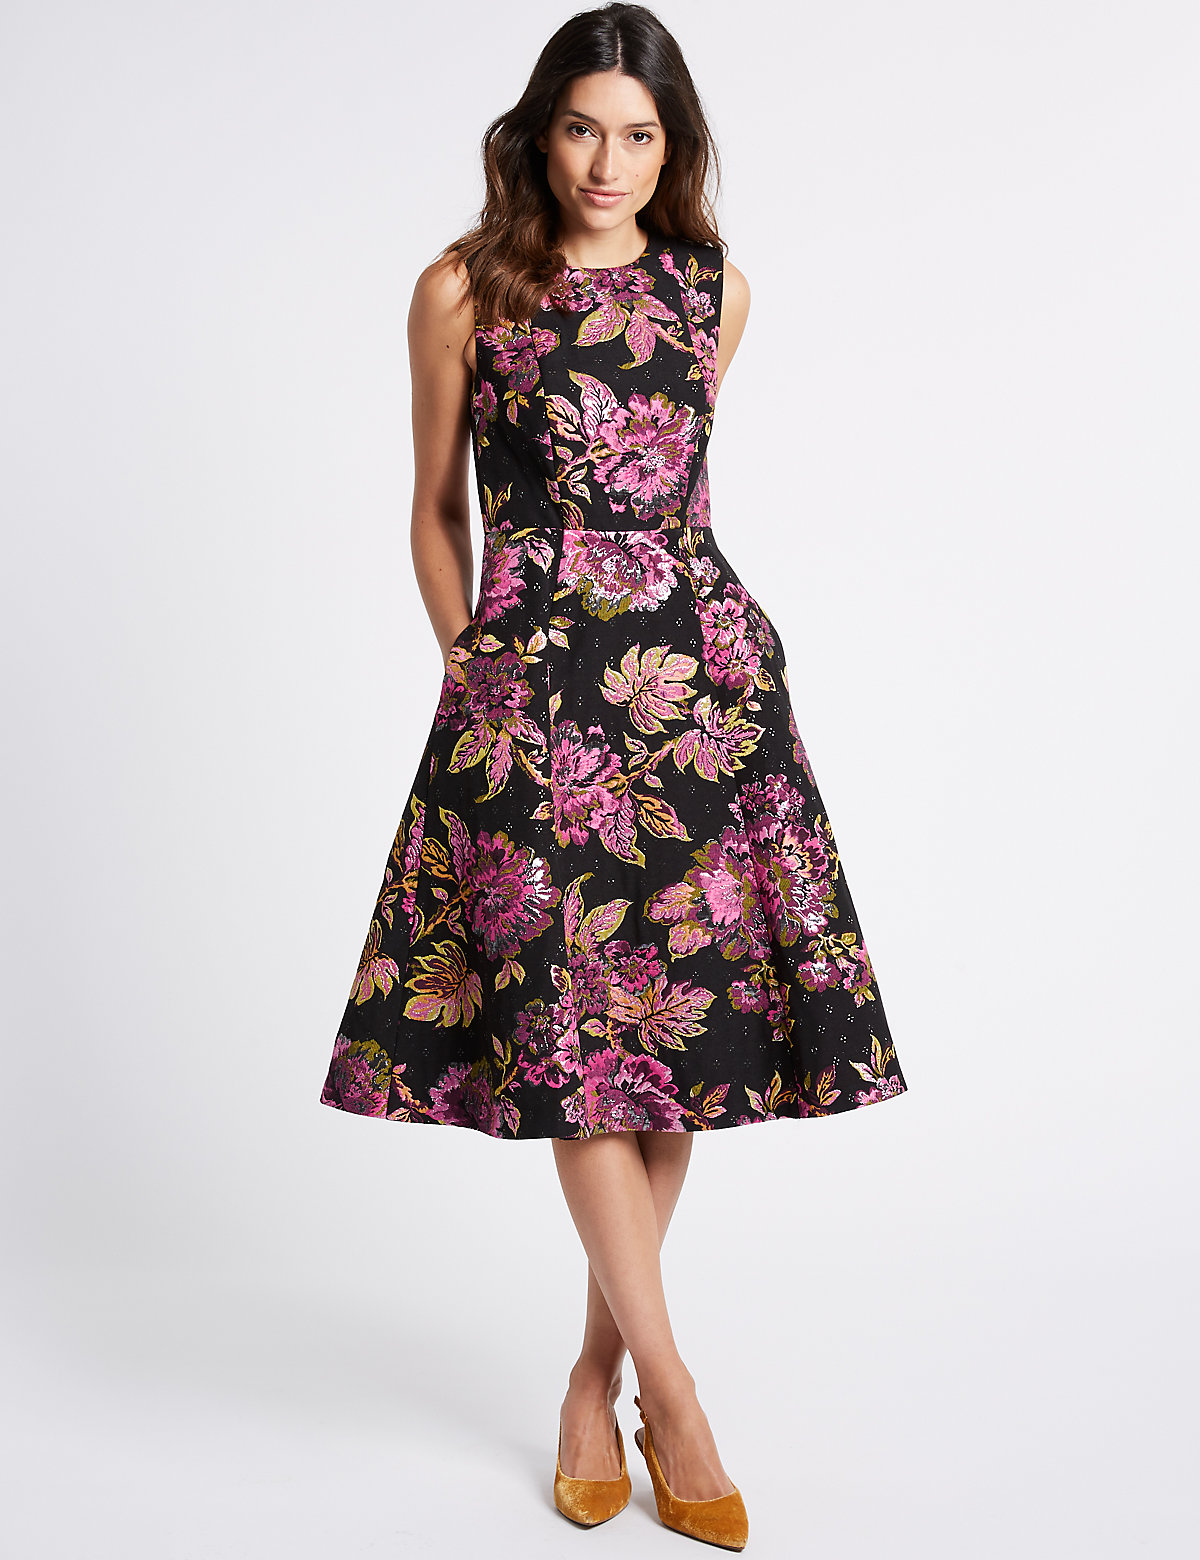 Marks & Spencer Catalogue - Women's Dresses & Skirts from Marks ...